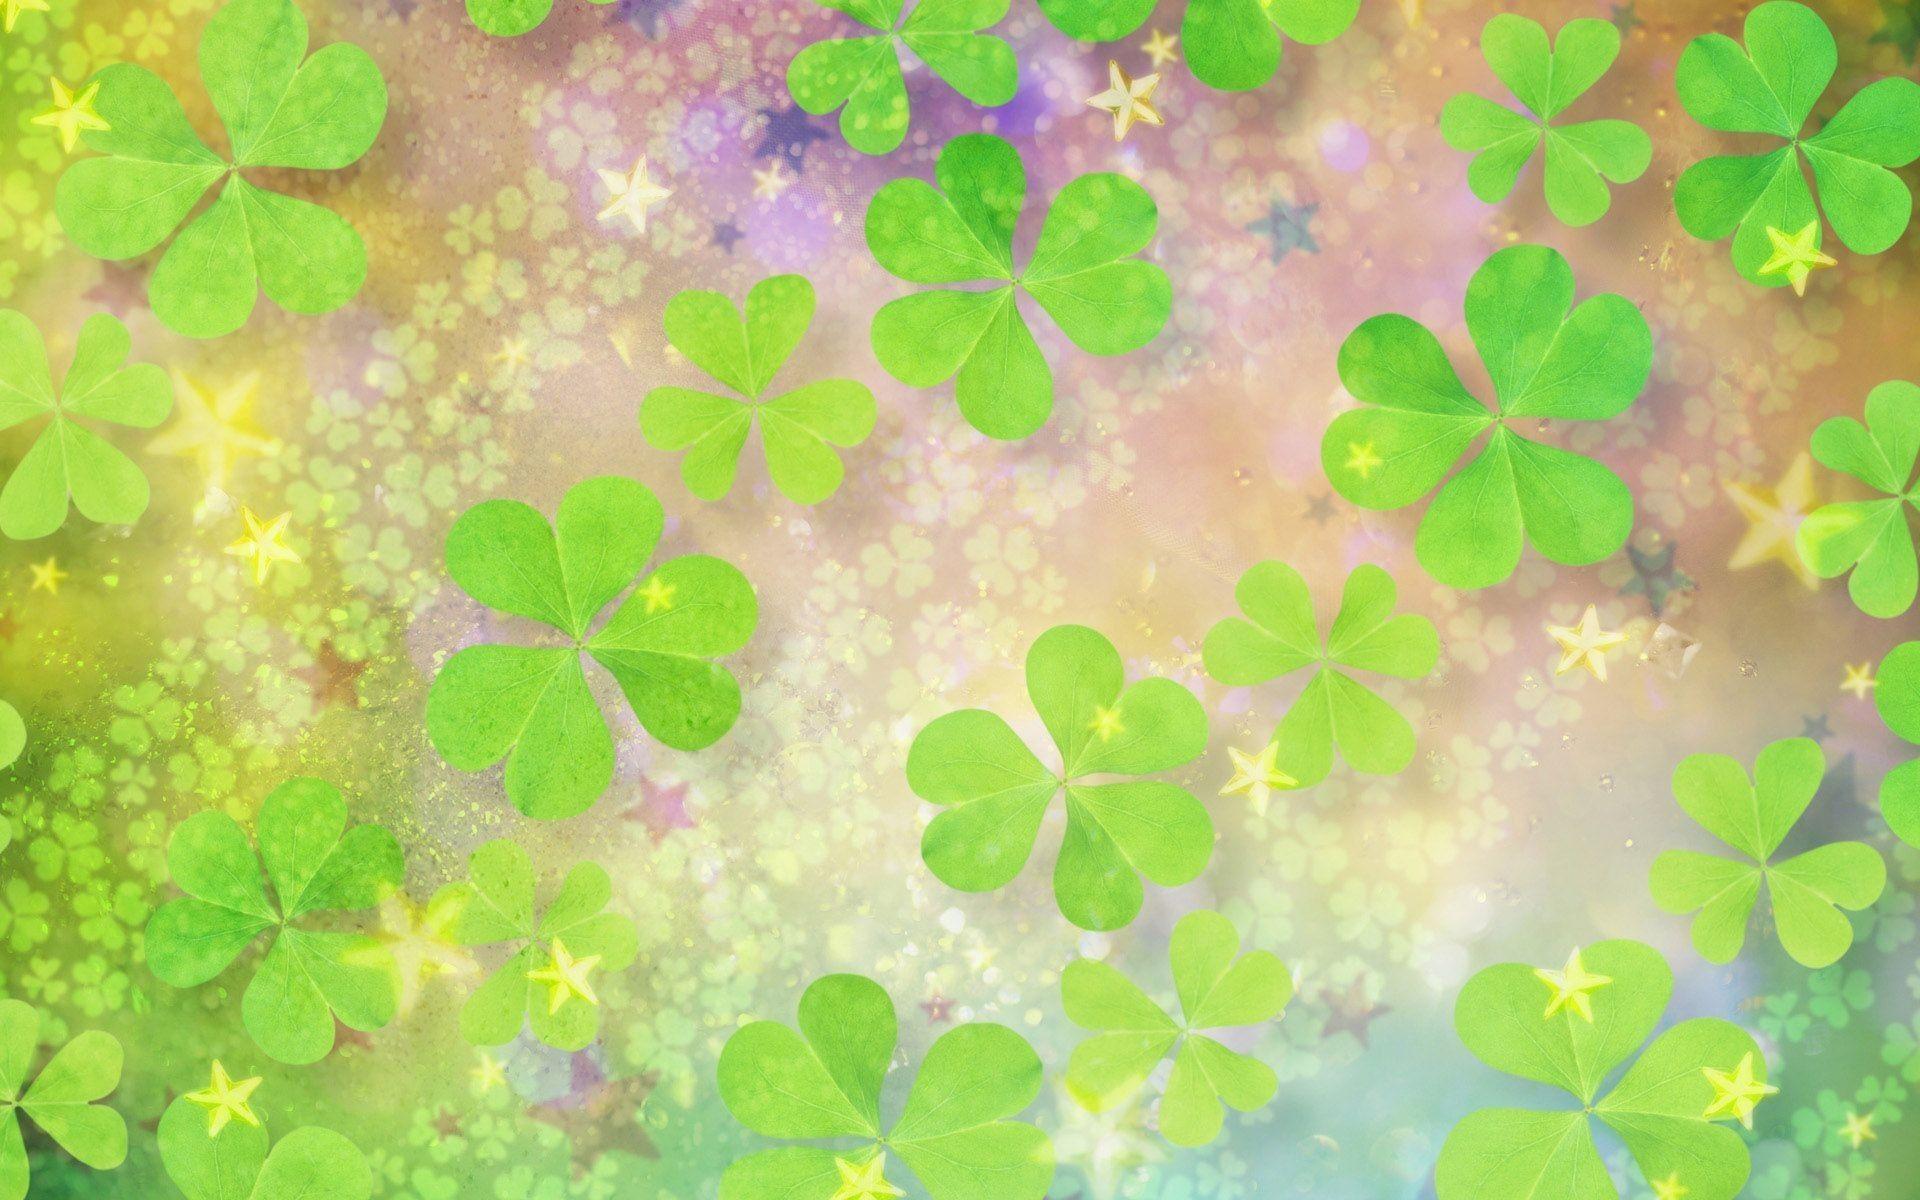 Prizegrabcom  Share for Good Luck  Lucky charm wallpapers for phone Lucky  wallpaper Android wallpaper